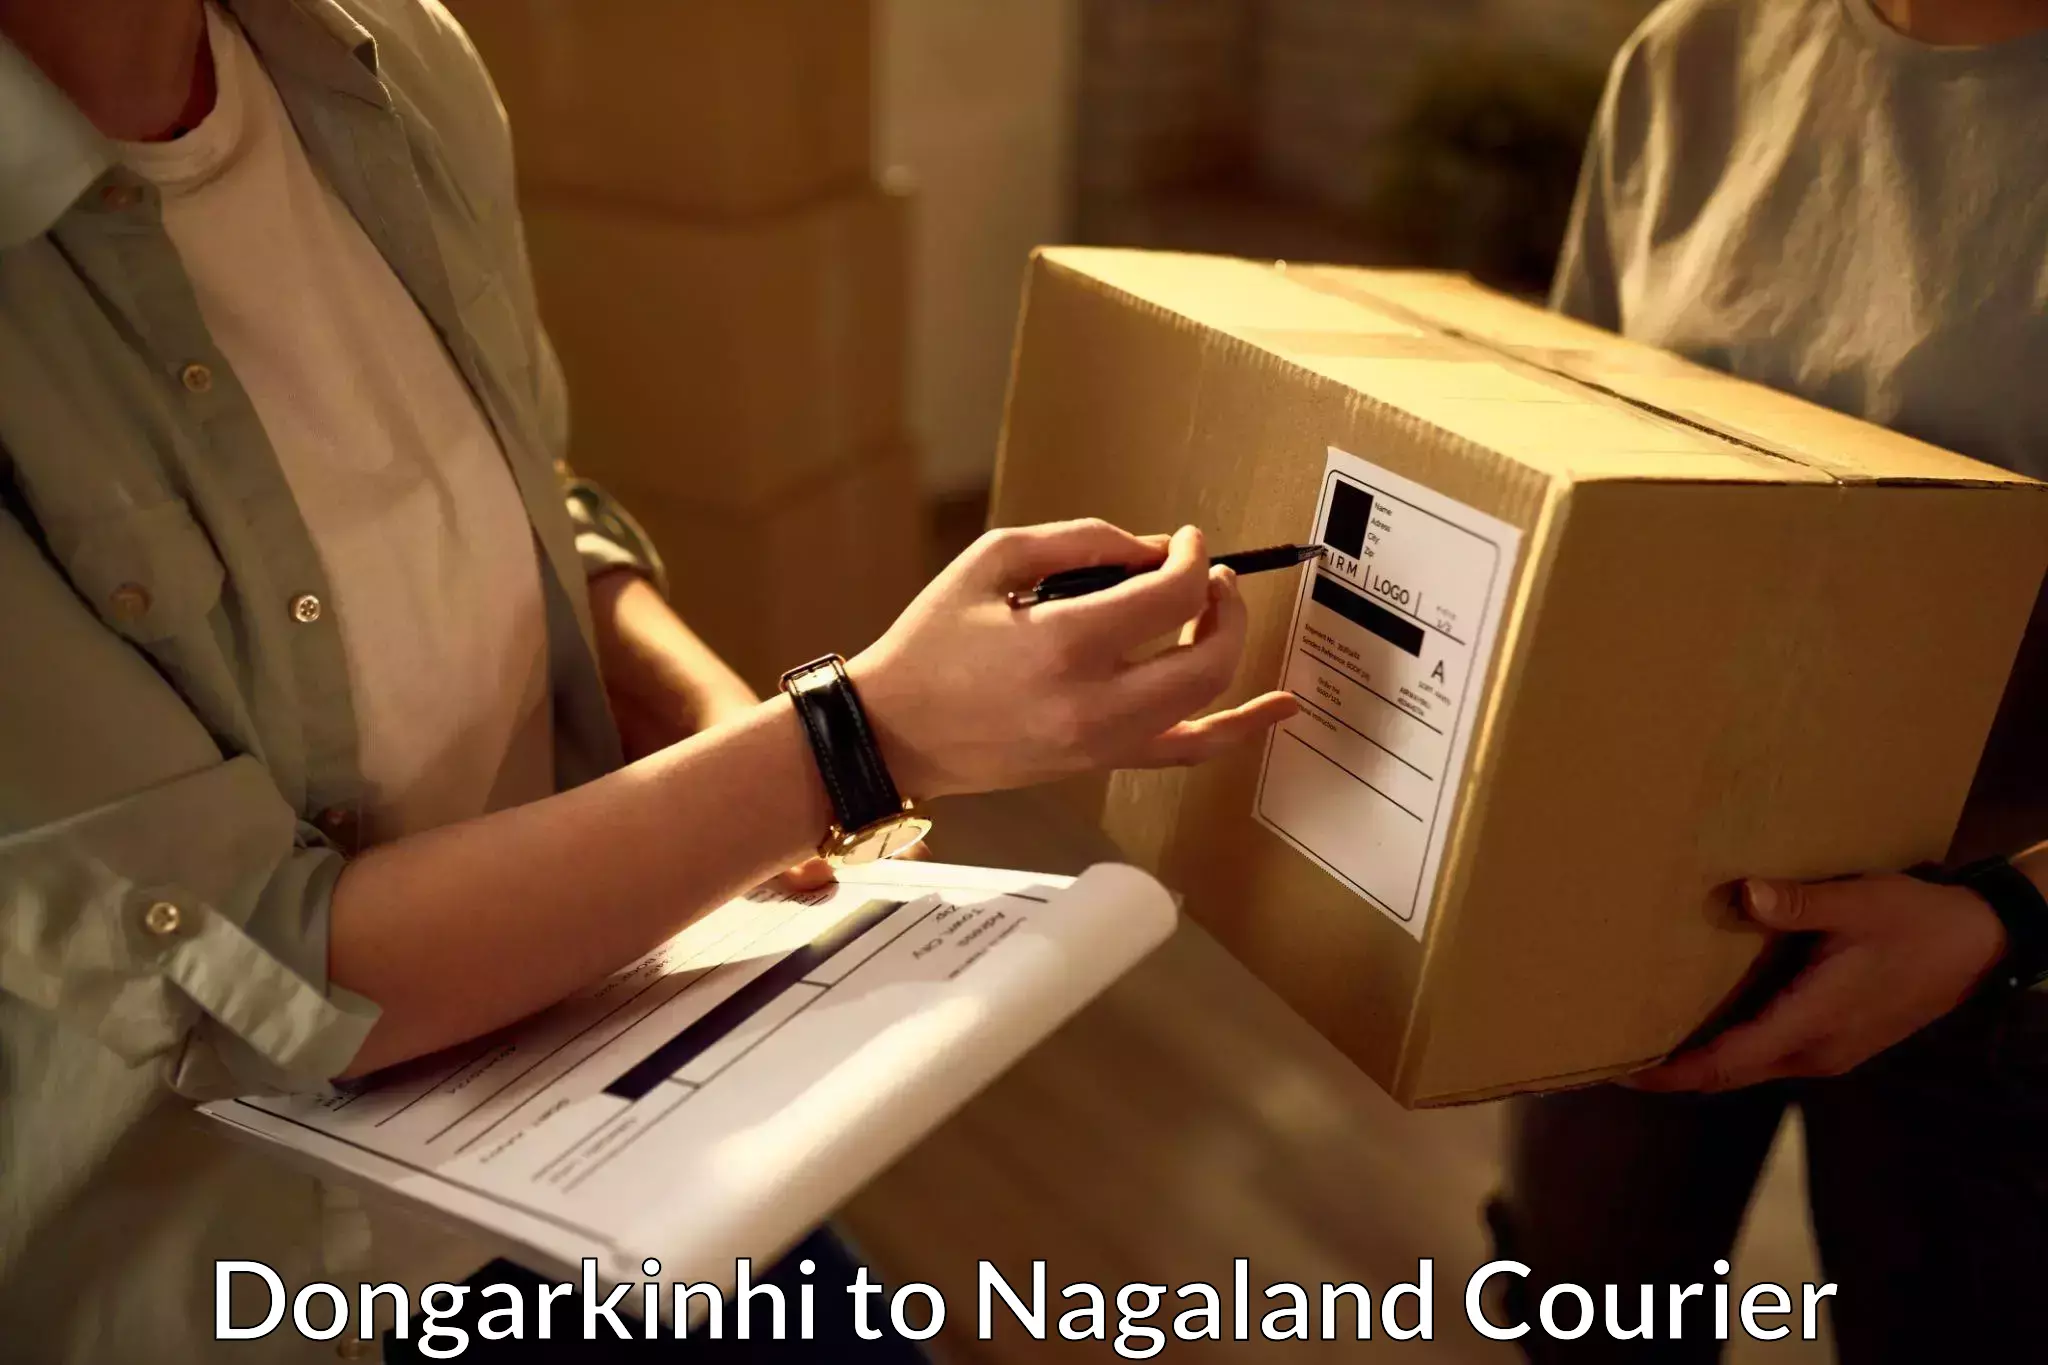 Reliable delivery network in Dongarkinhi to Nagaland